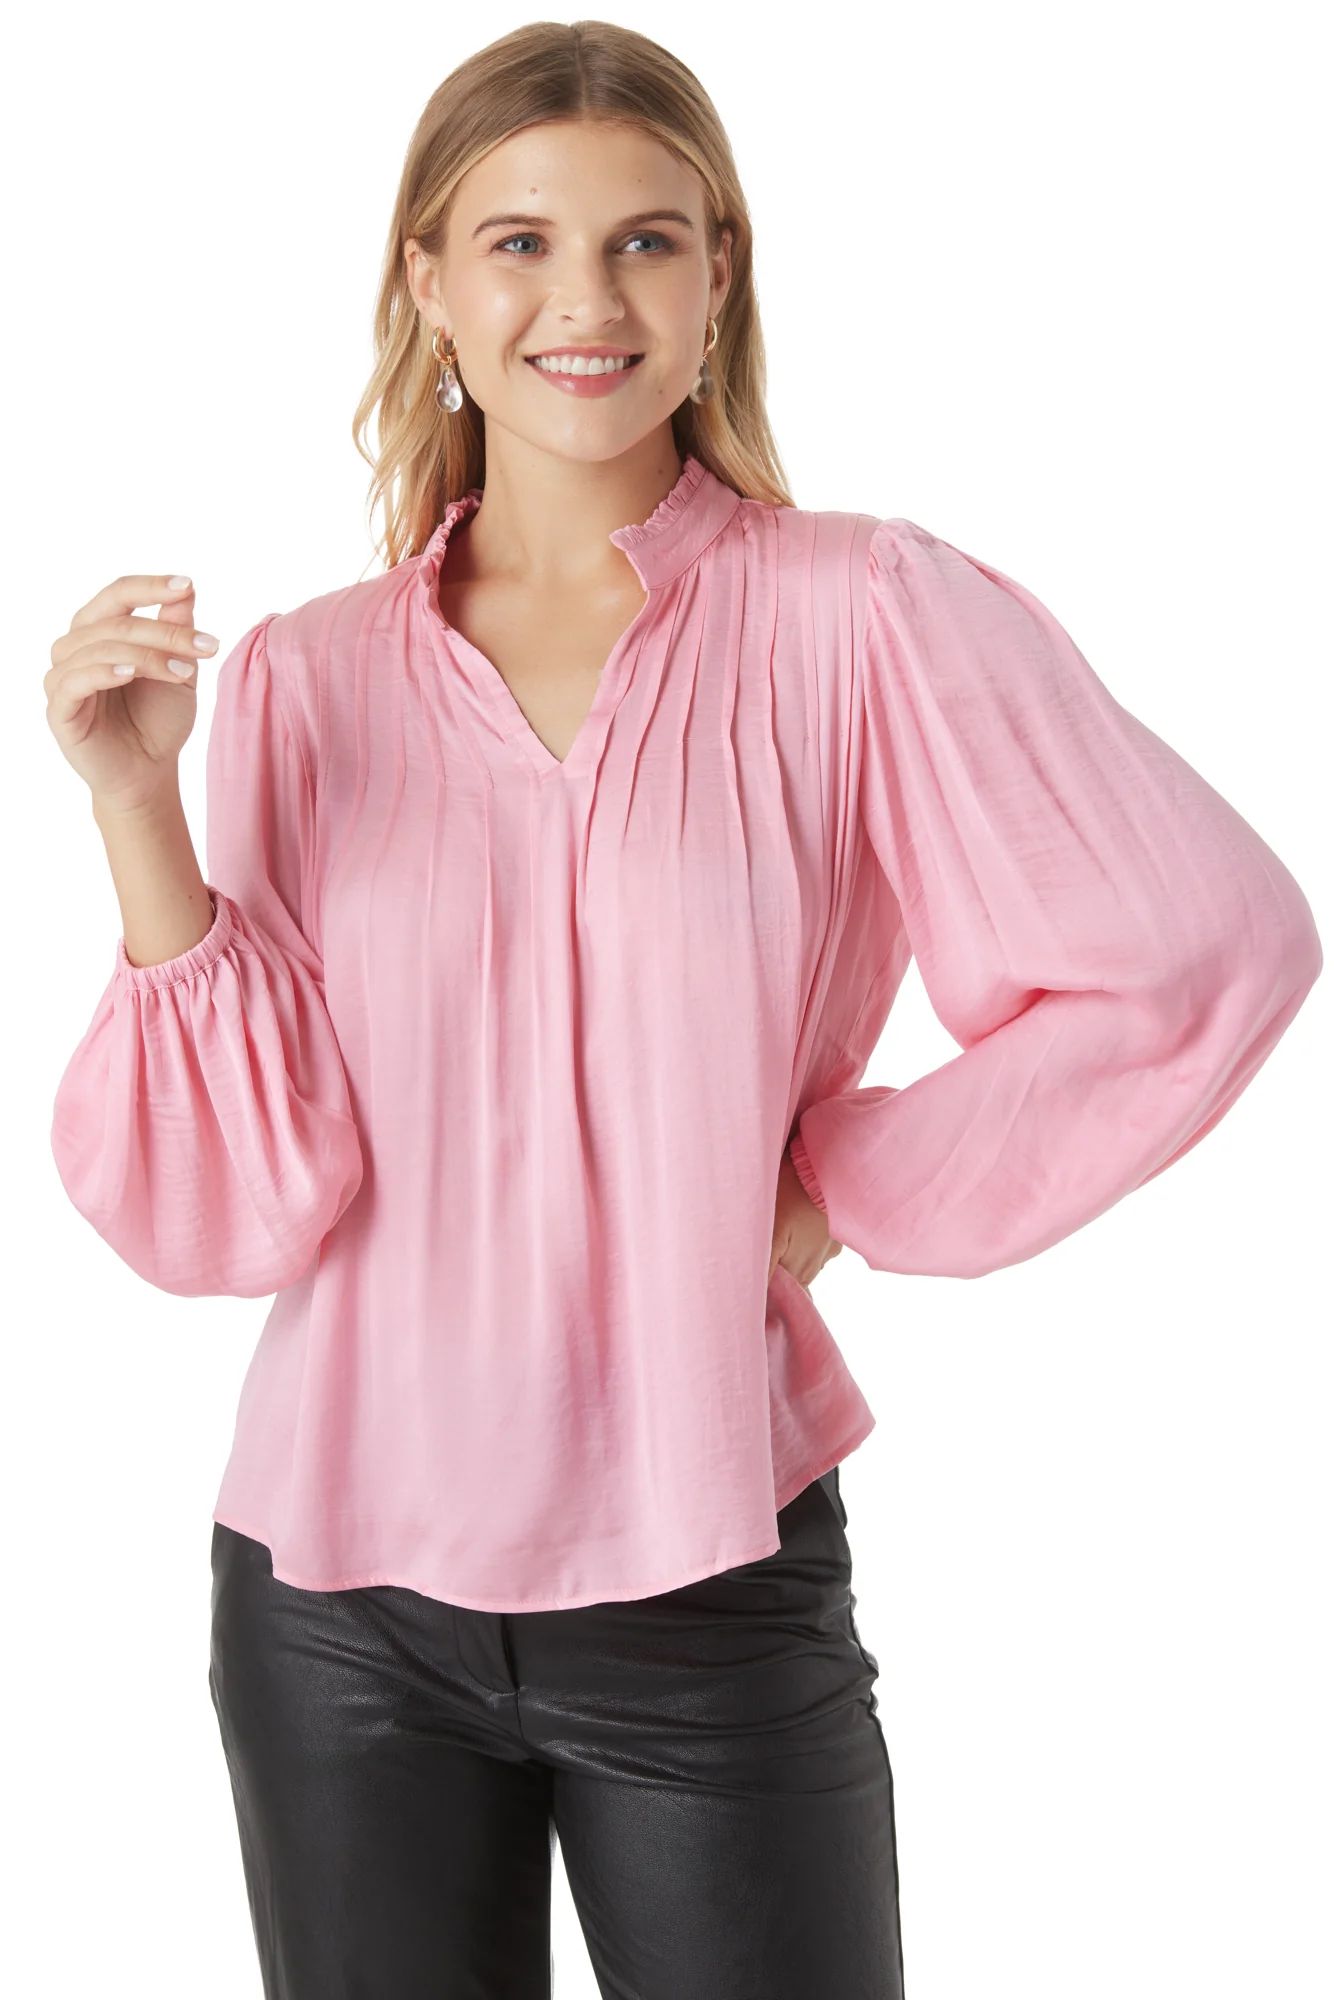 Gabby Blouse in Ballet | CROSBY by Mollie Burch | CROSBY by Mollie Burch